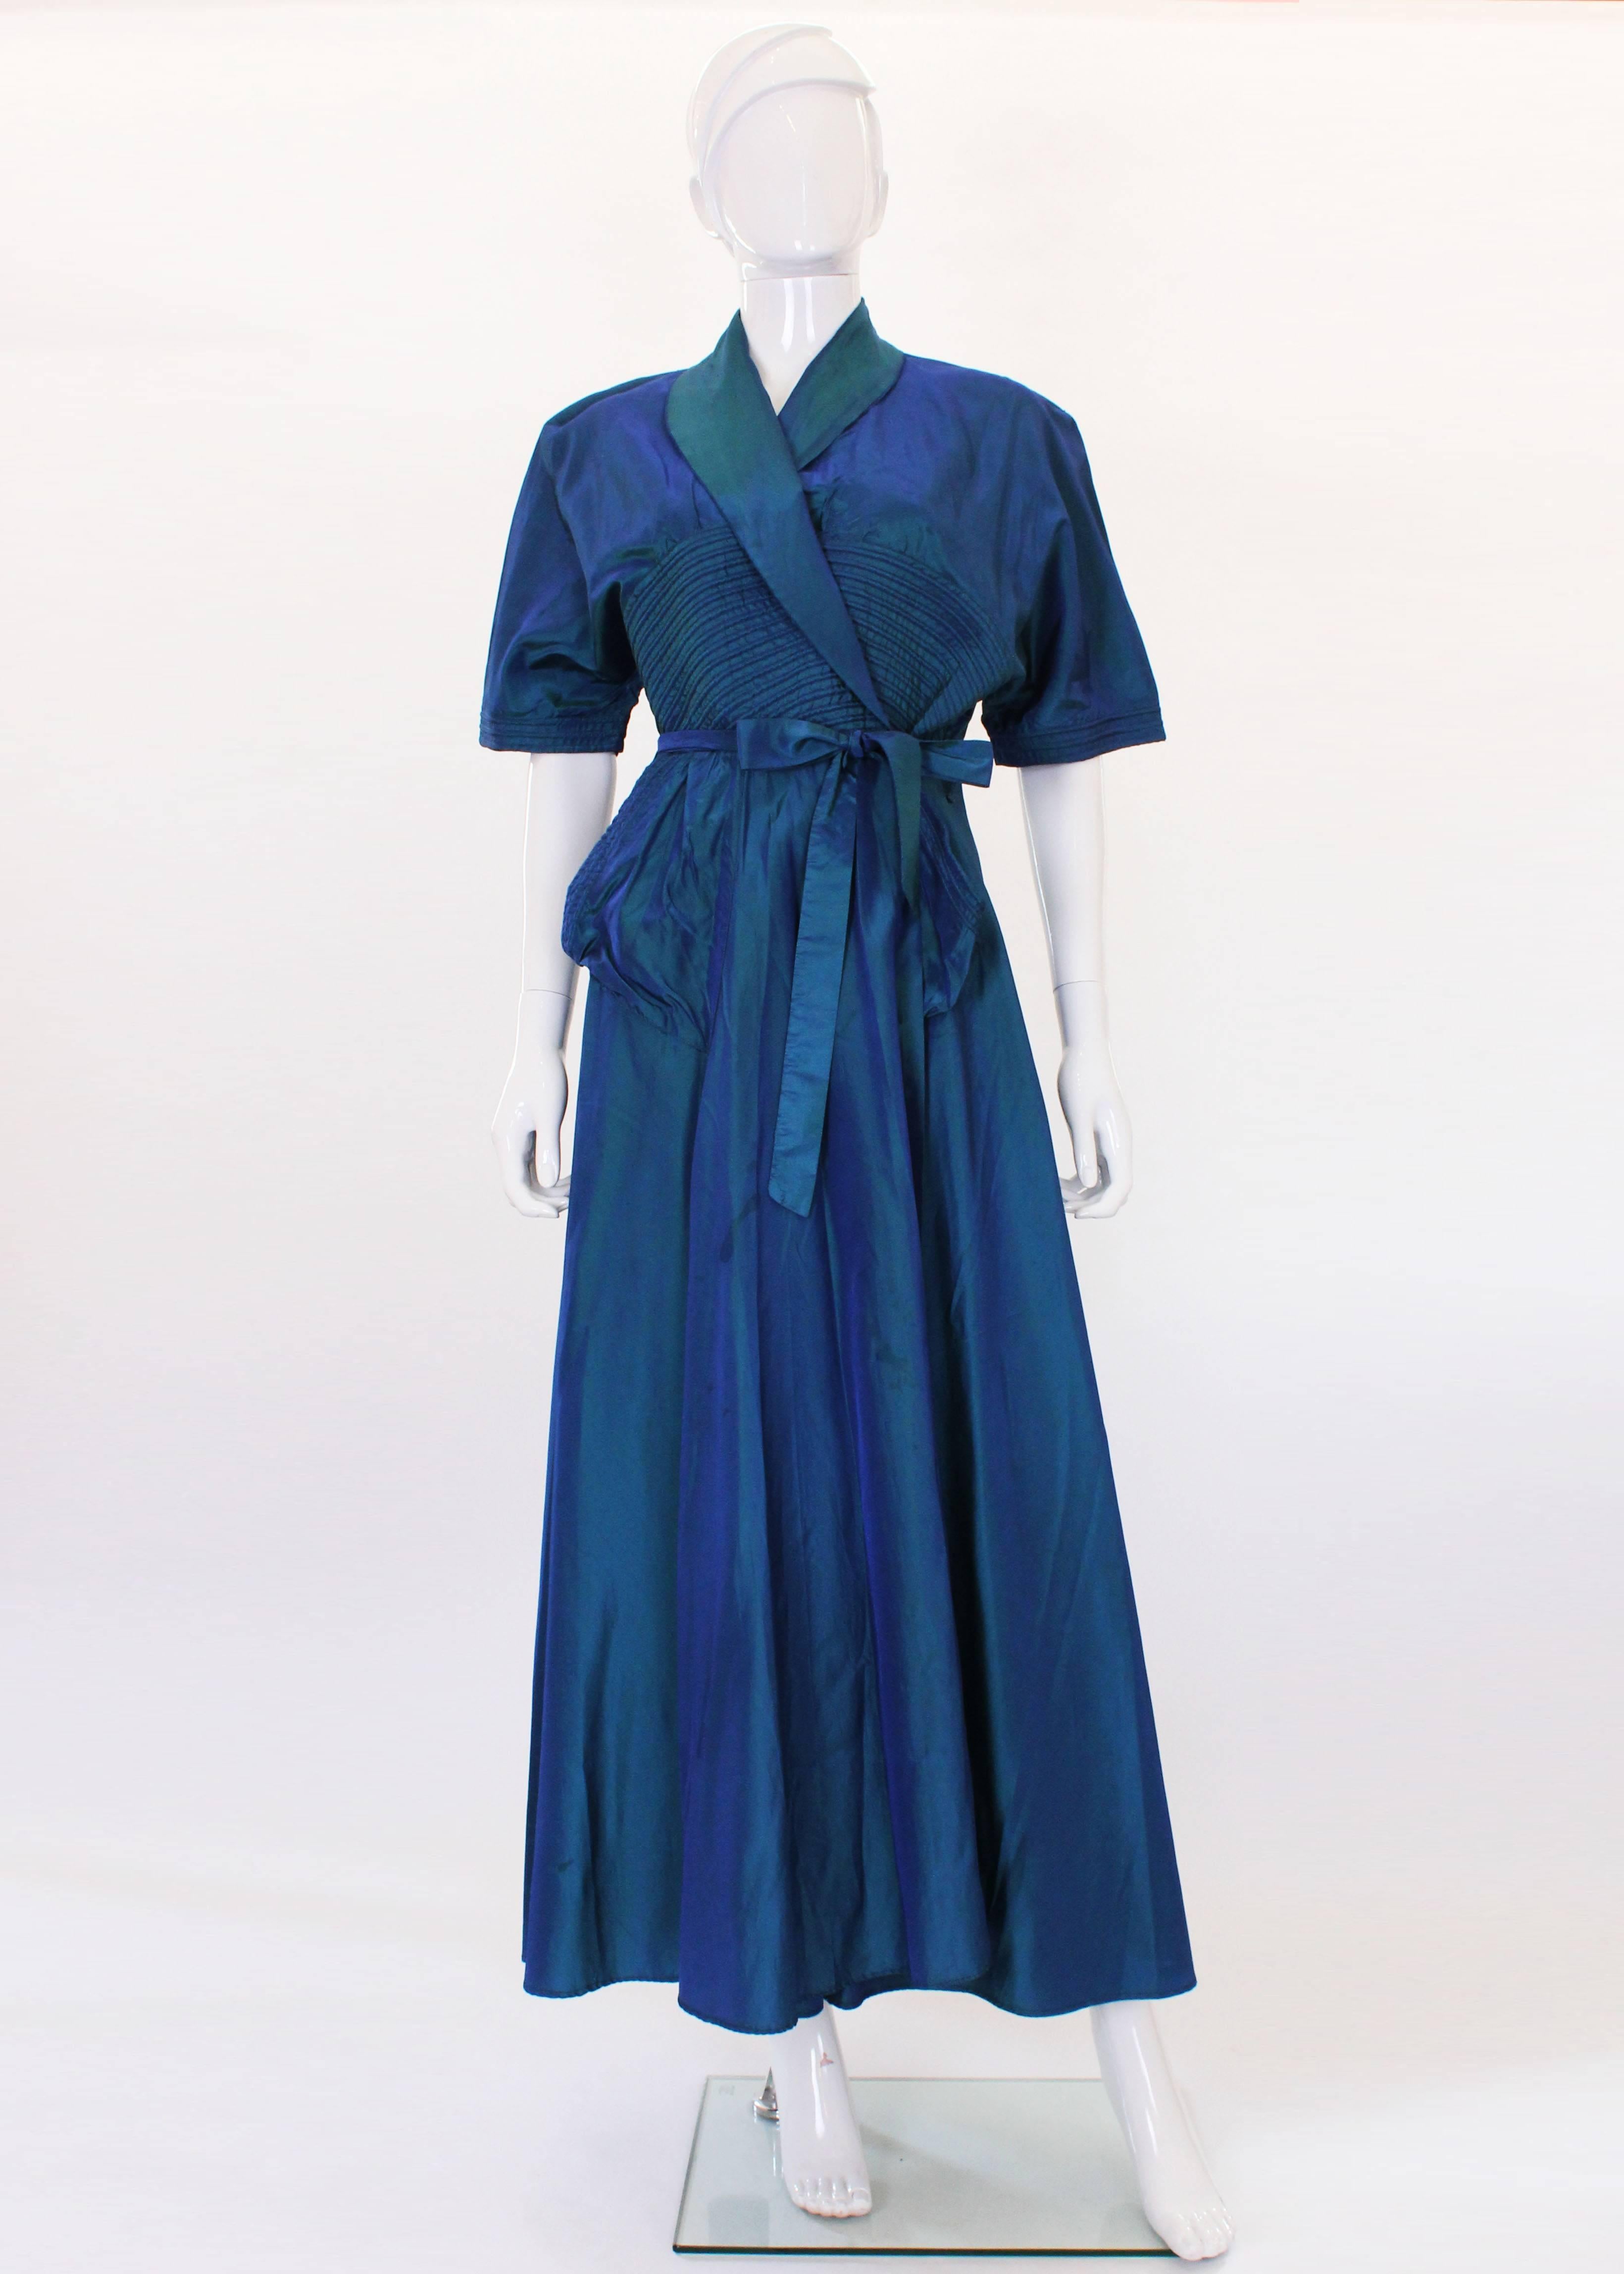 A stunning gown or very glamorous house coat from the 1940s. In a wonderful blue, this gown is a real head turner. It has short leaves with ribbed stitching detail on the sleeves, bust and pockets. It is a wrap over dress with a belt in the same